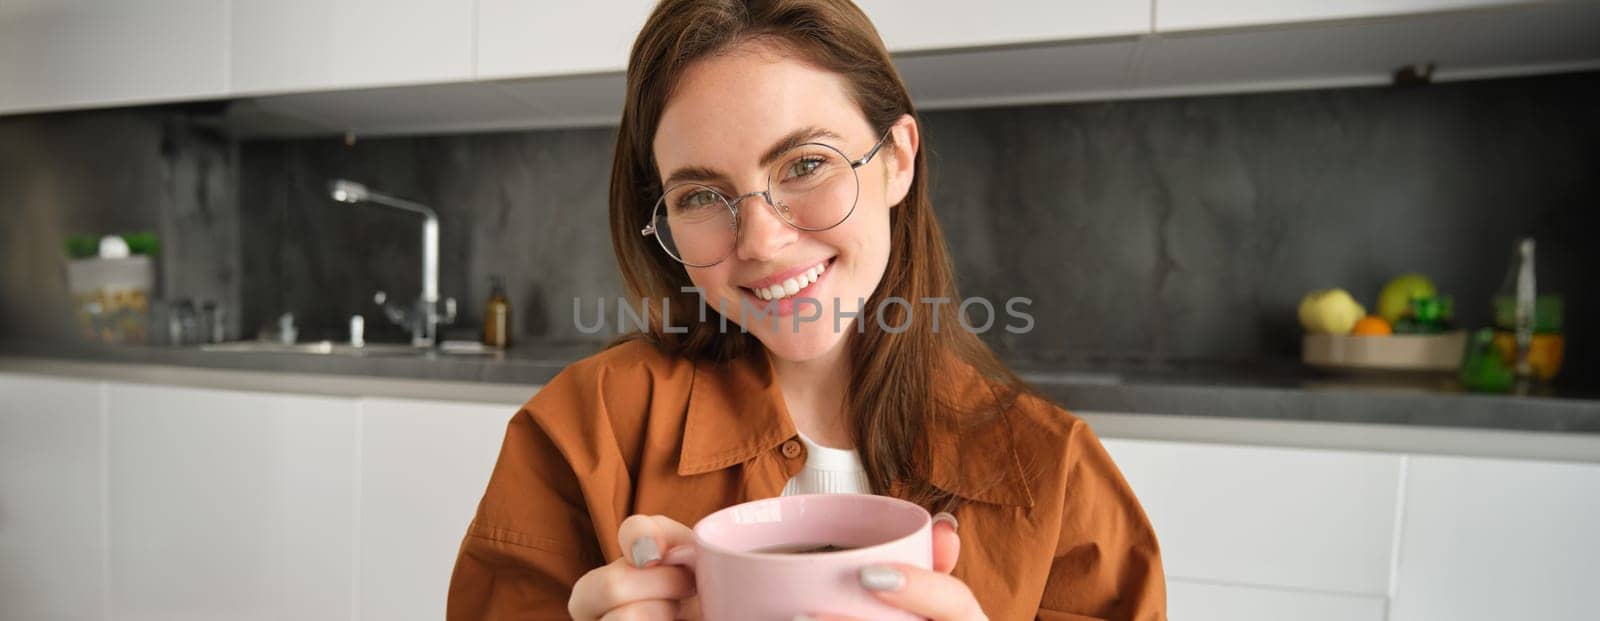 Close up portrait of beautiful girl in glasses, holding hot cup of drink, drinking tea or coffee at home and smiling at camera.